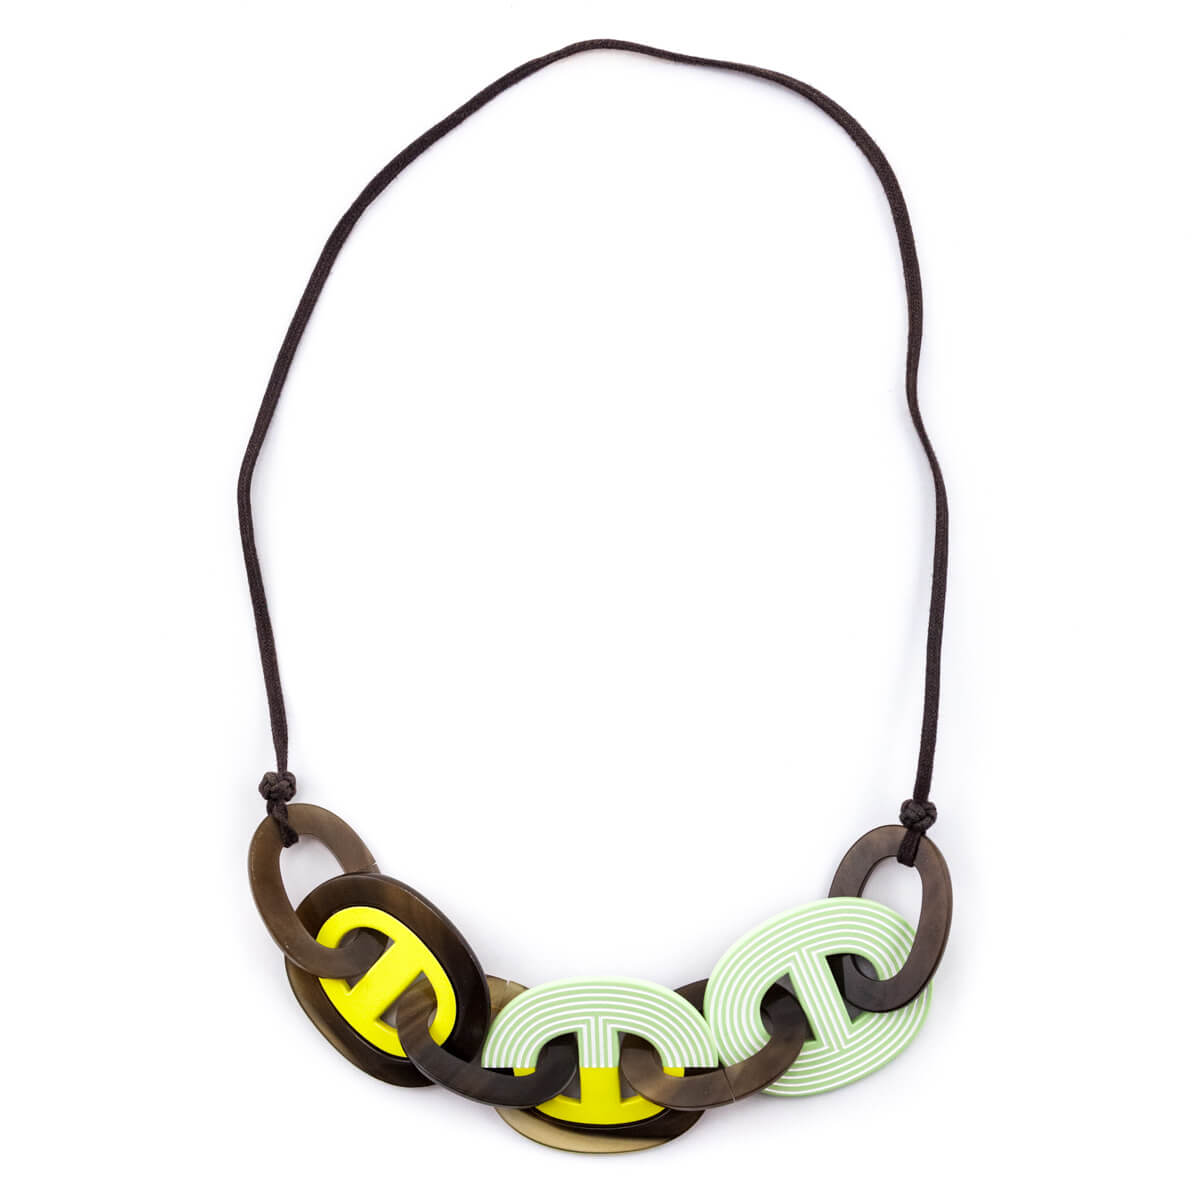 Hermes Horn, Yellow & Green Karamba Necklace - Love that Bag etc - Preowned Authentic Designer Handbags & Preloved Fashions